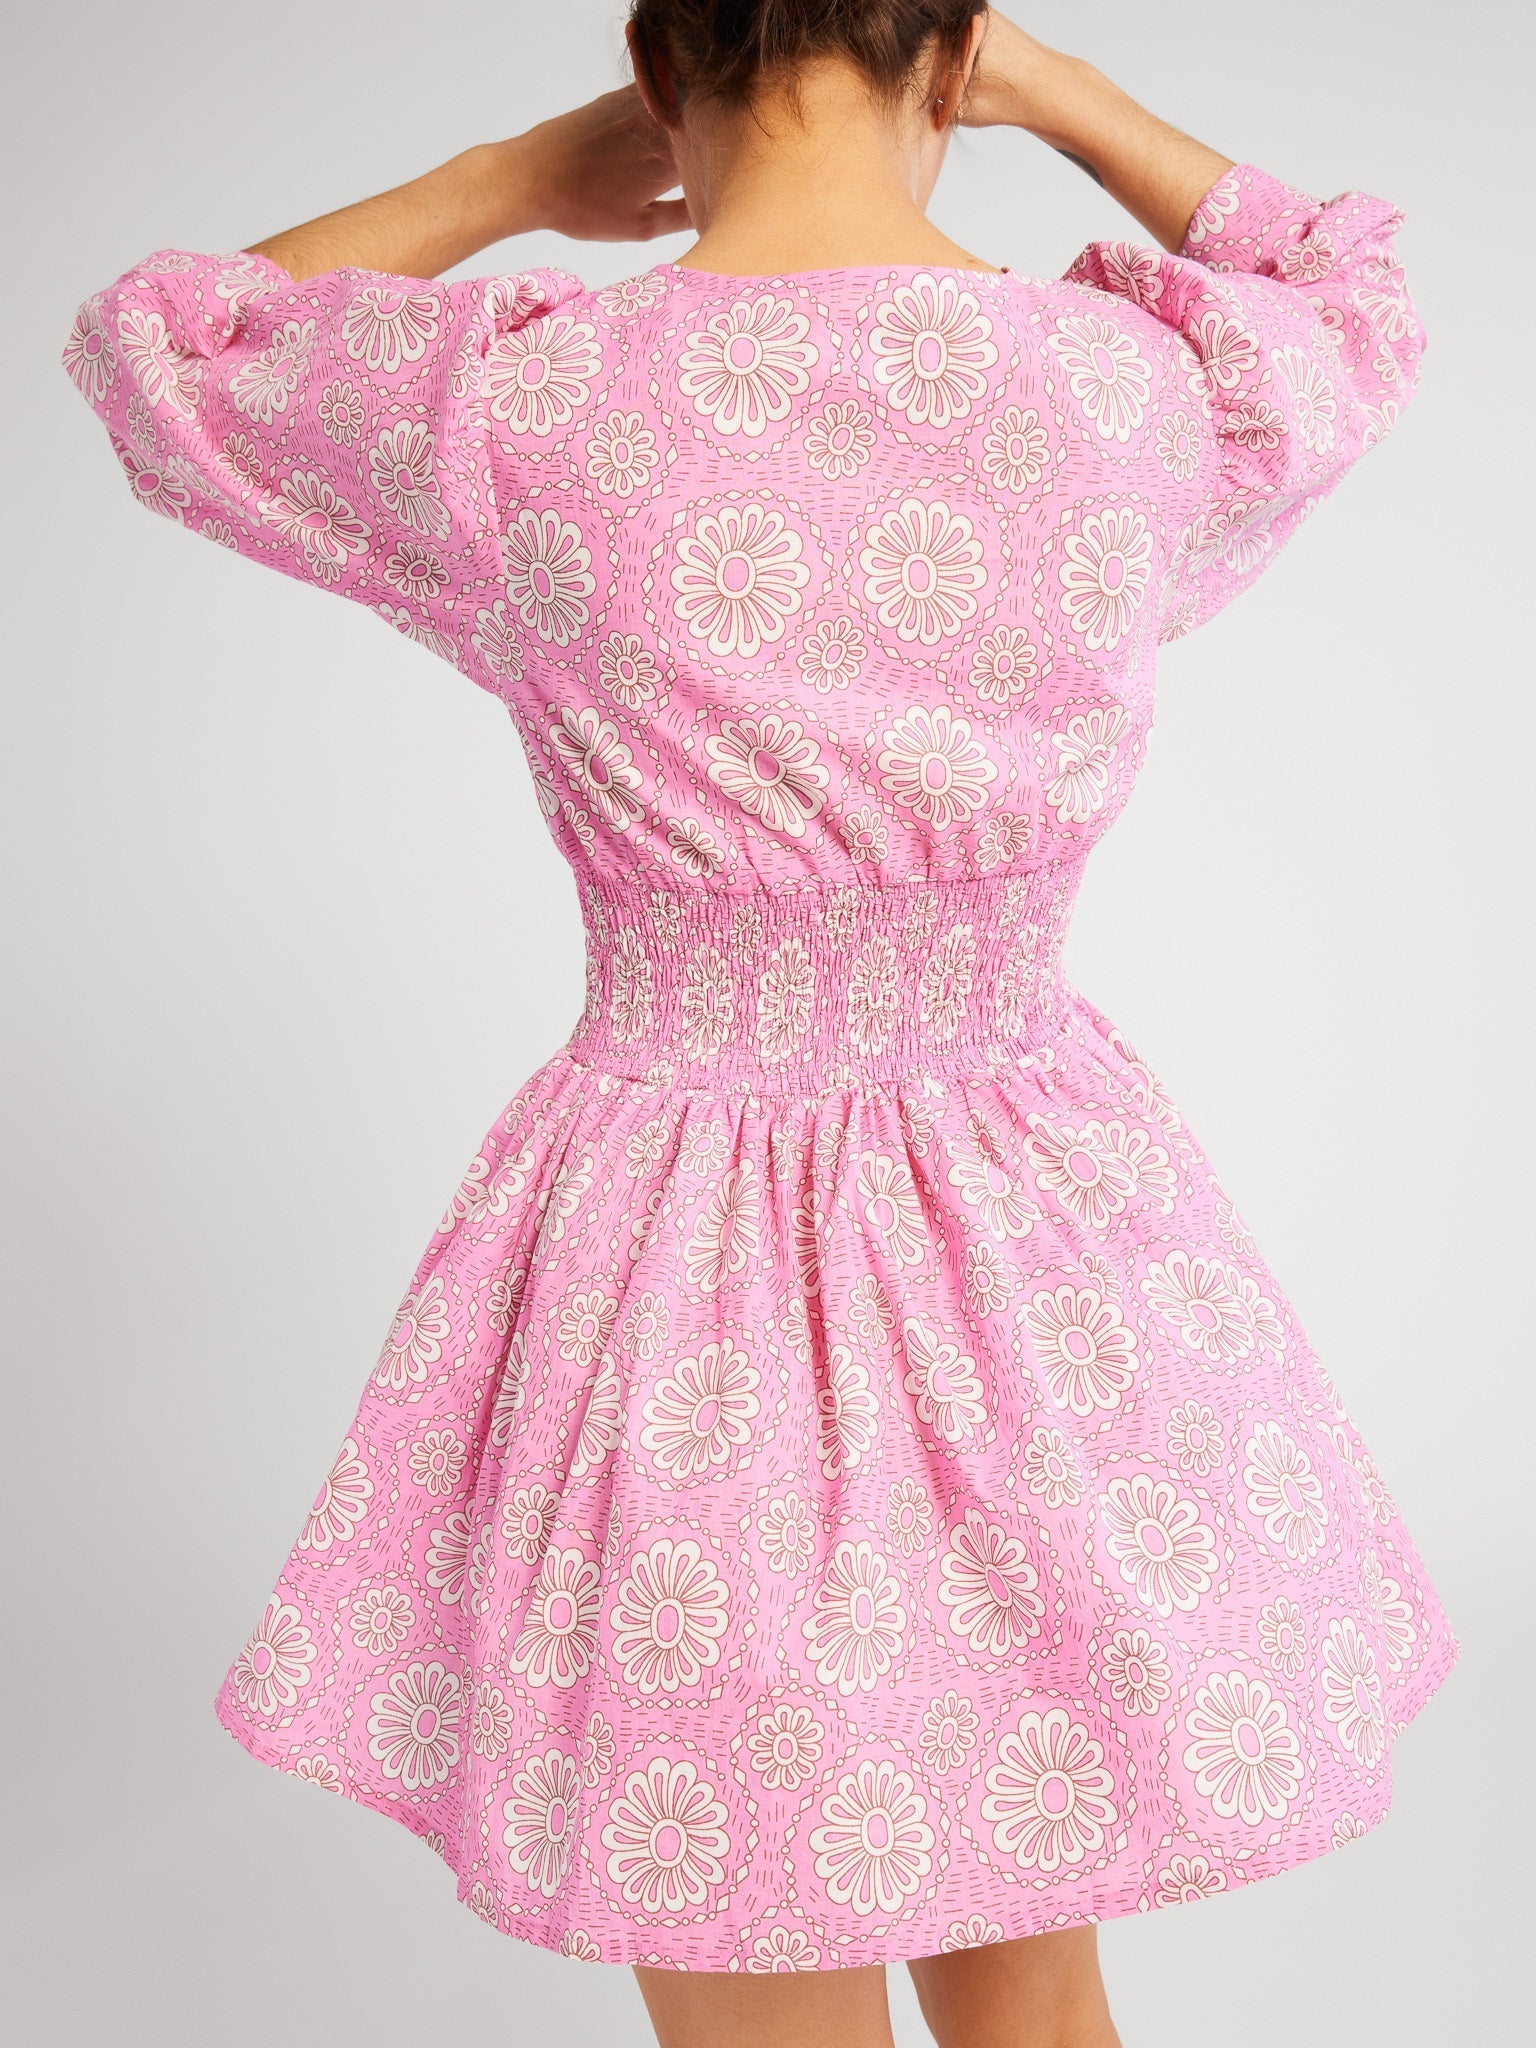 MILLE Clothing Claudia Dress in Pink Daisy